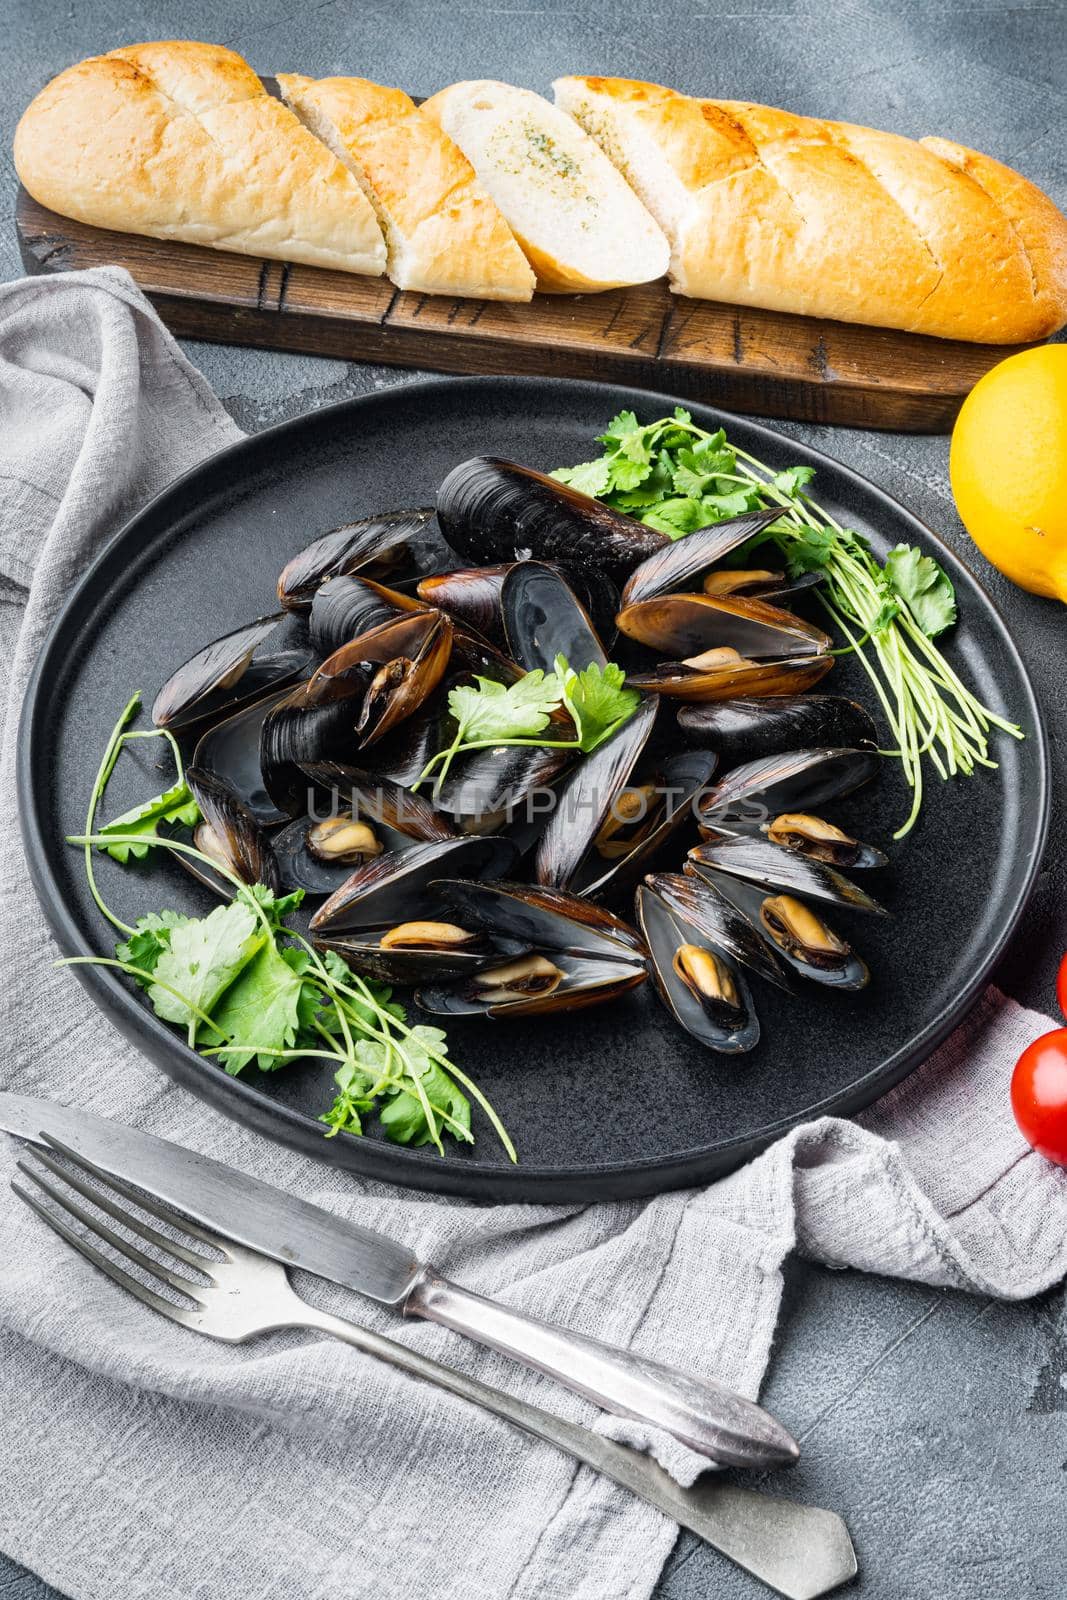 Steamed mussels in white wine, on plate, on gray background by Ilianesolenyi